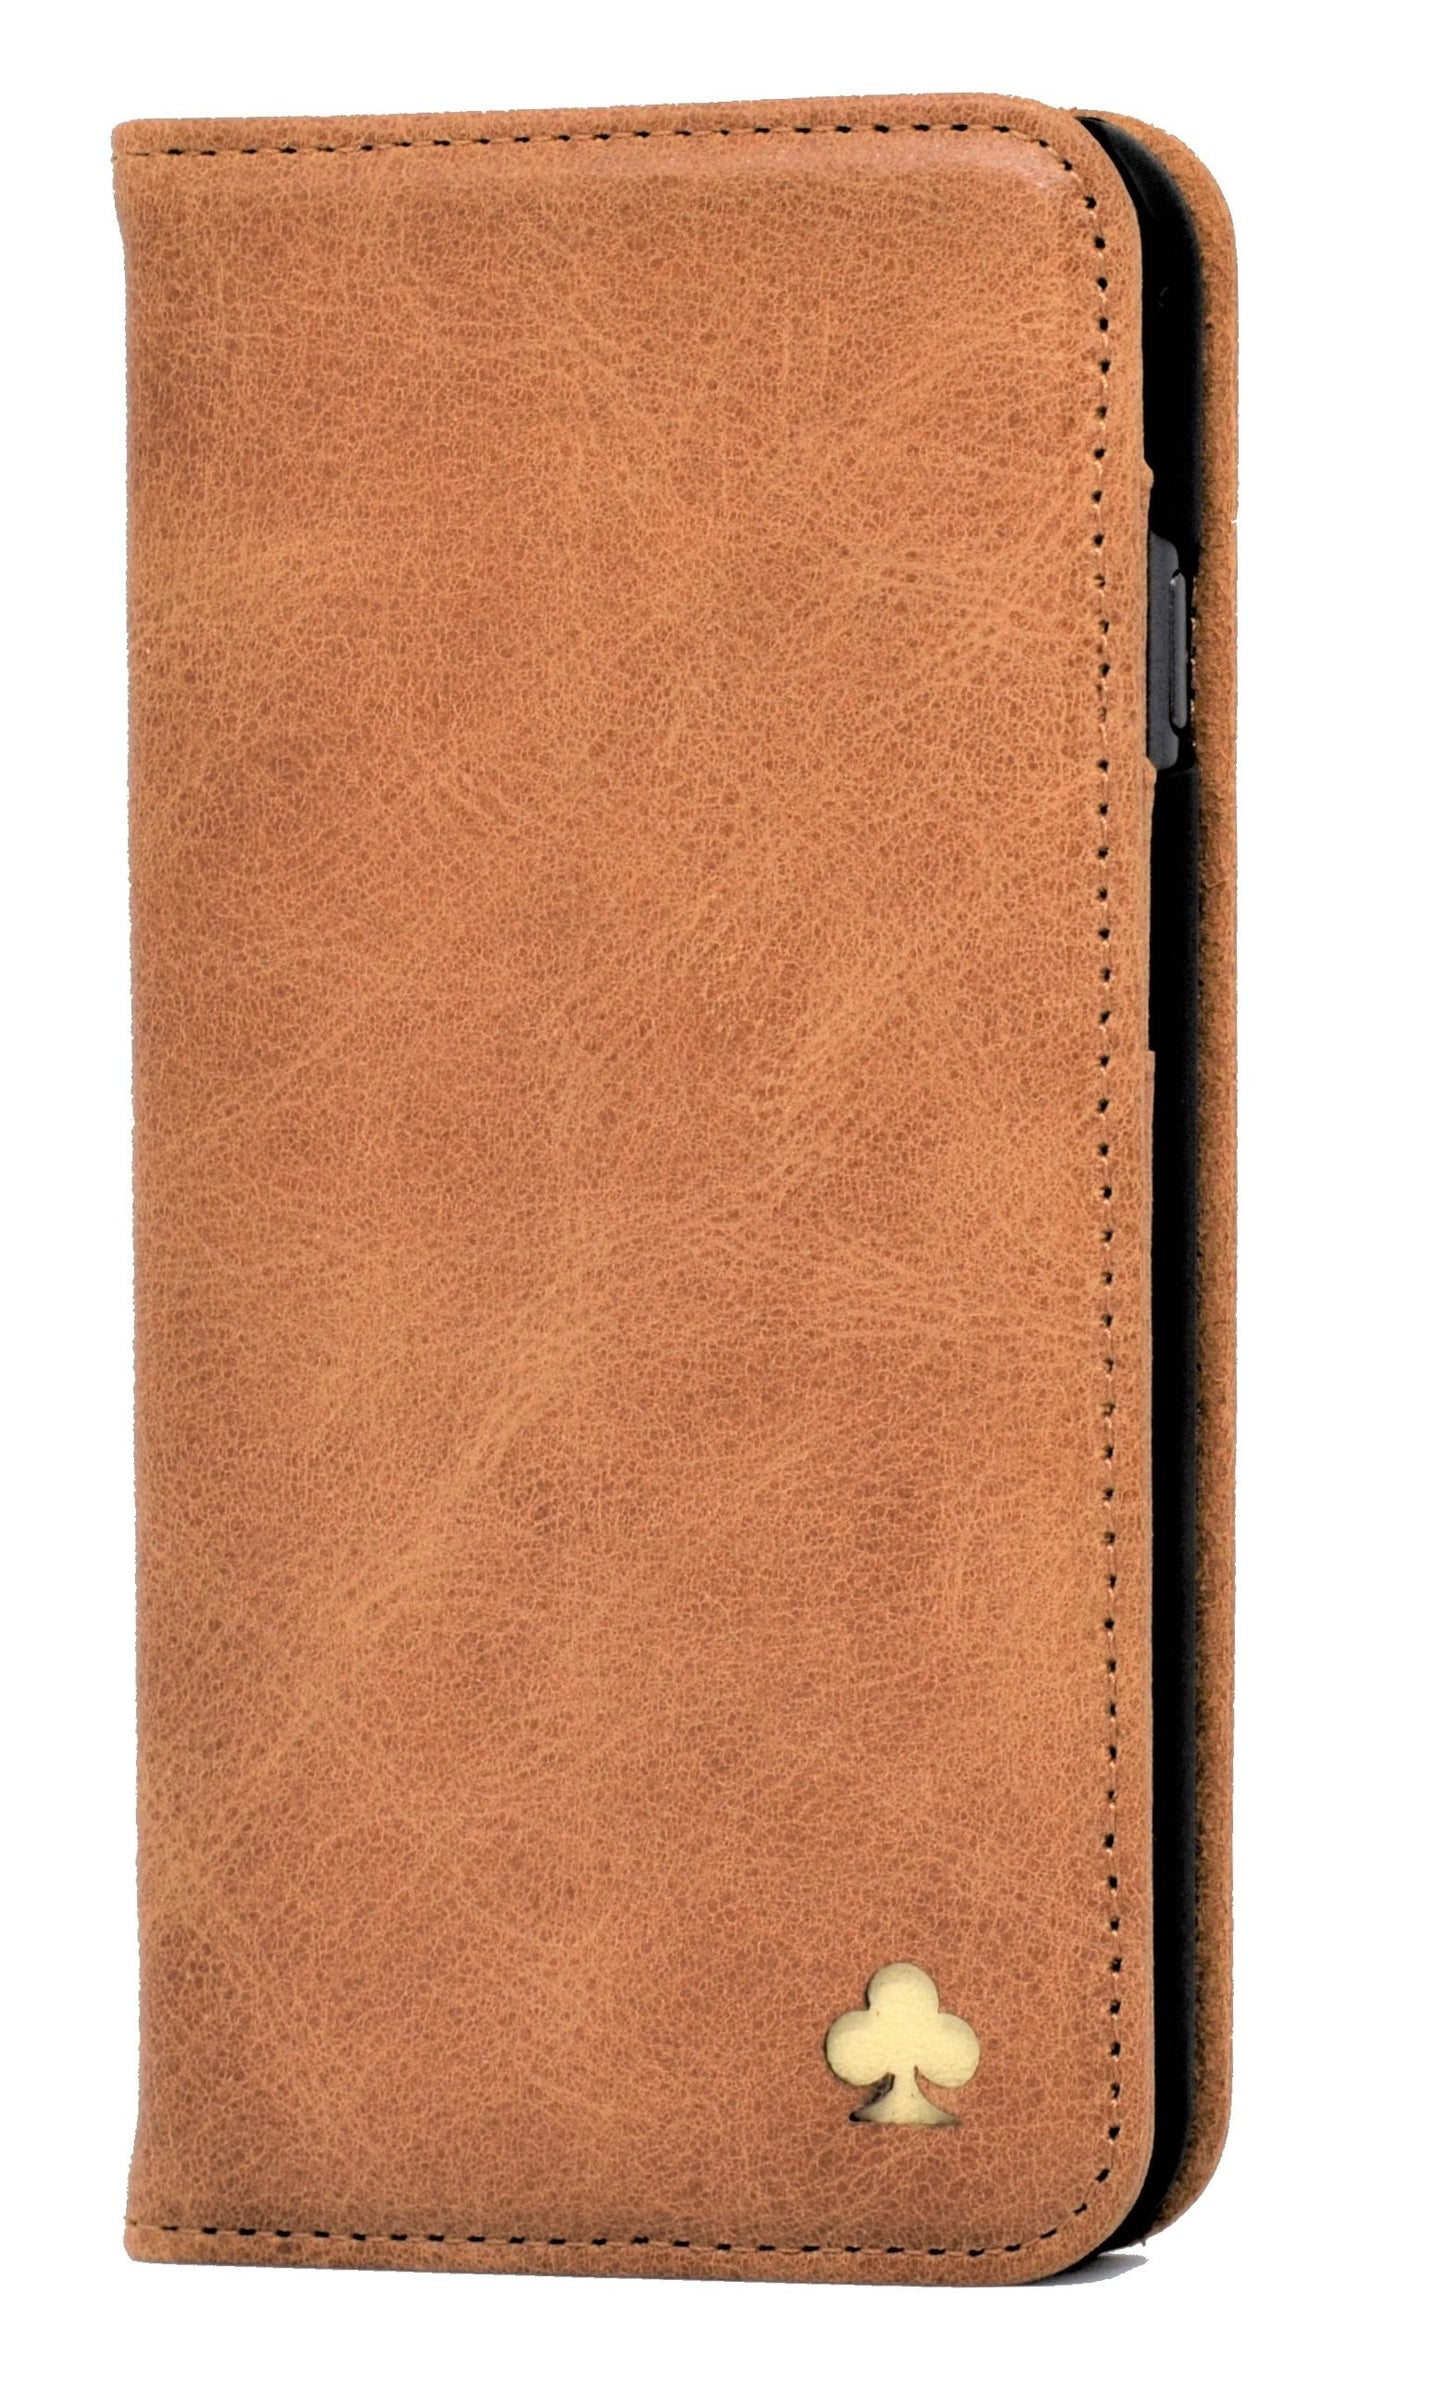 iPhone 12 Pro Leather Case. Premium Slim Genuine Leather Stand Case/Cover/Wallet (Tan)